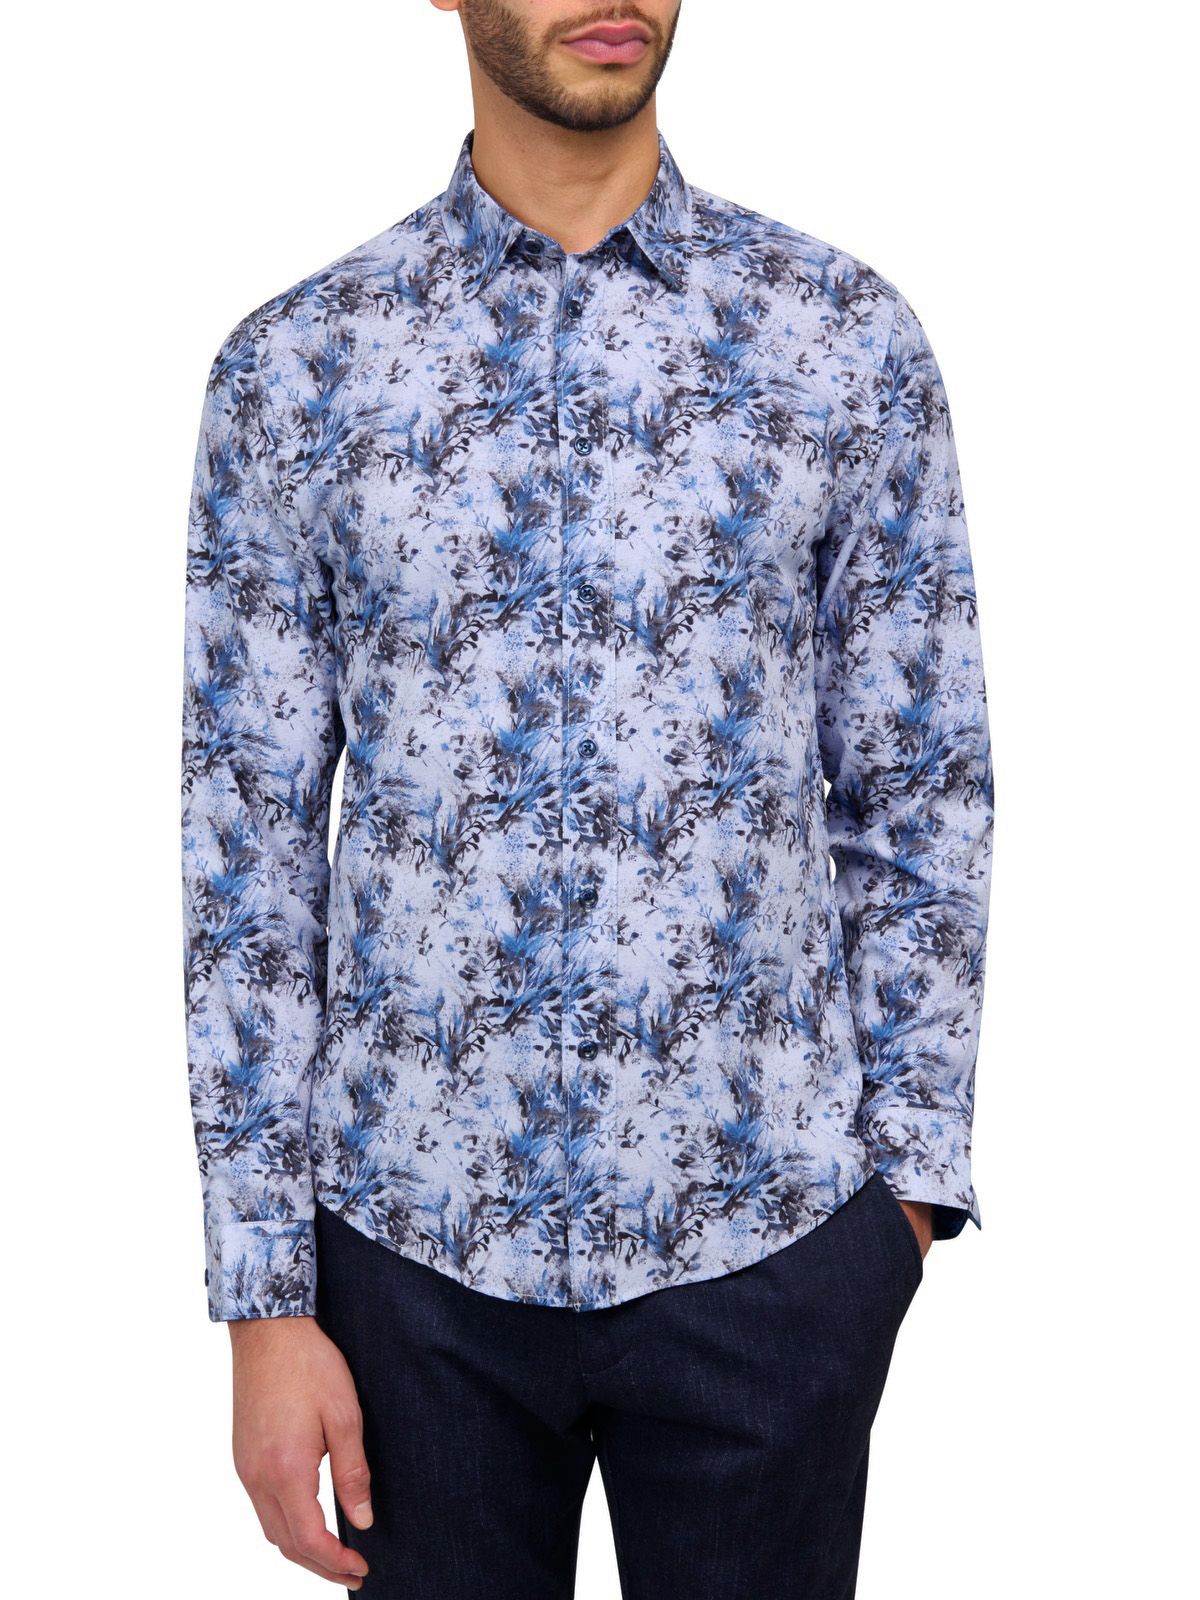 ABSTRACT LEAF SHIRT